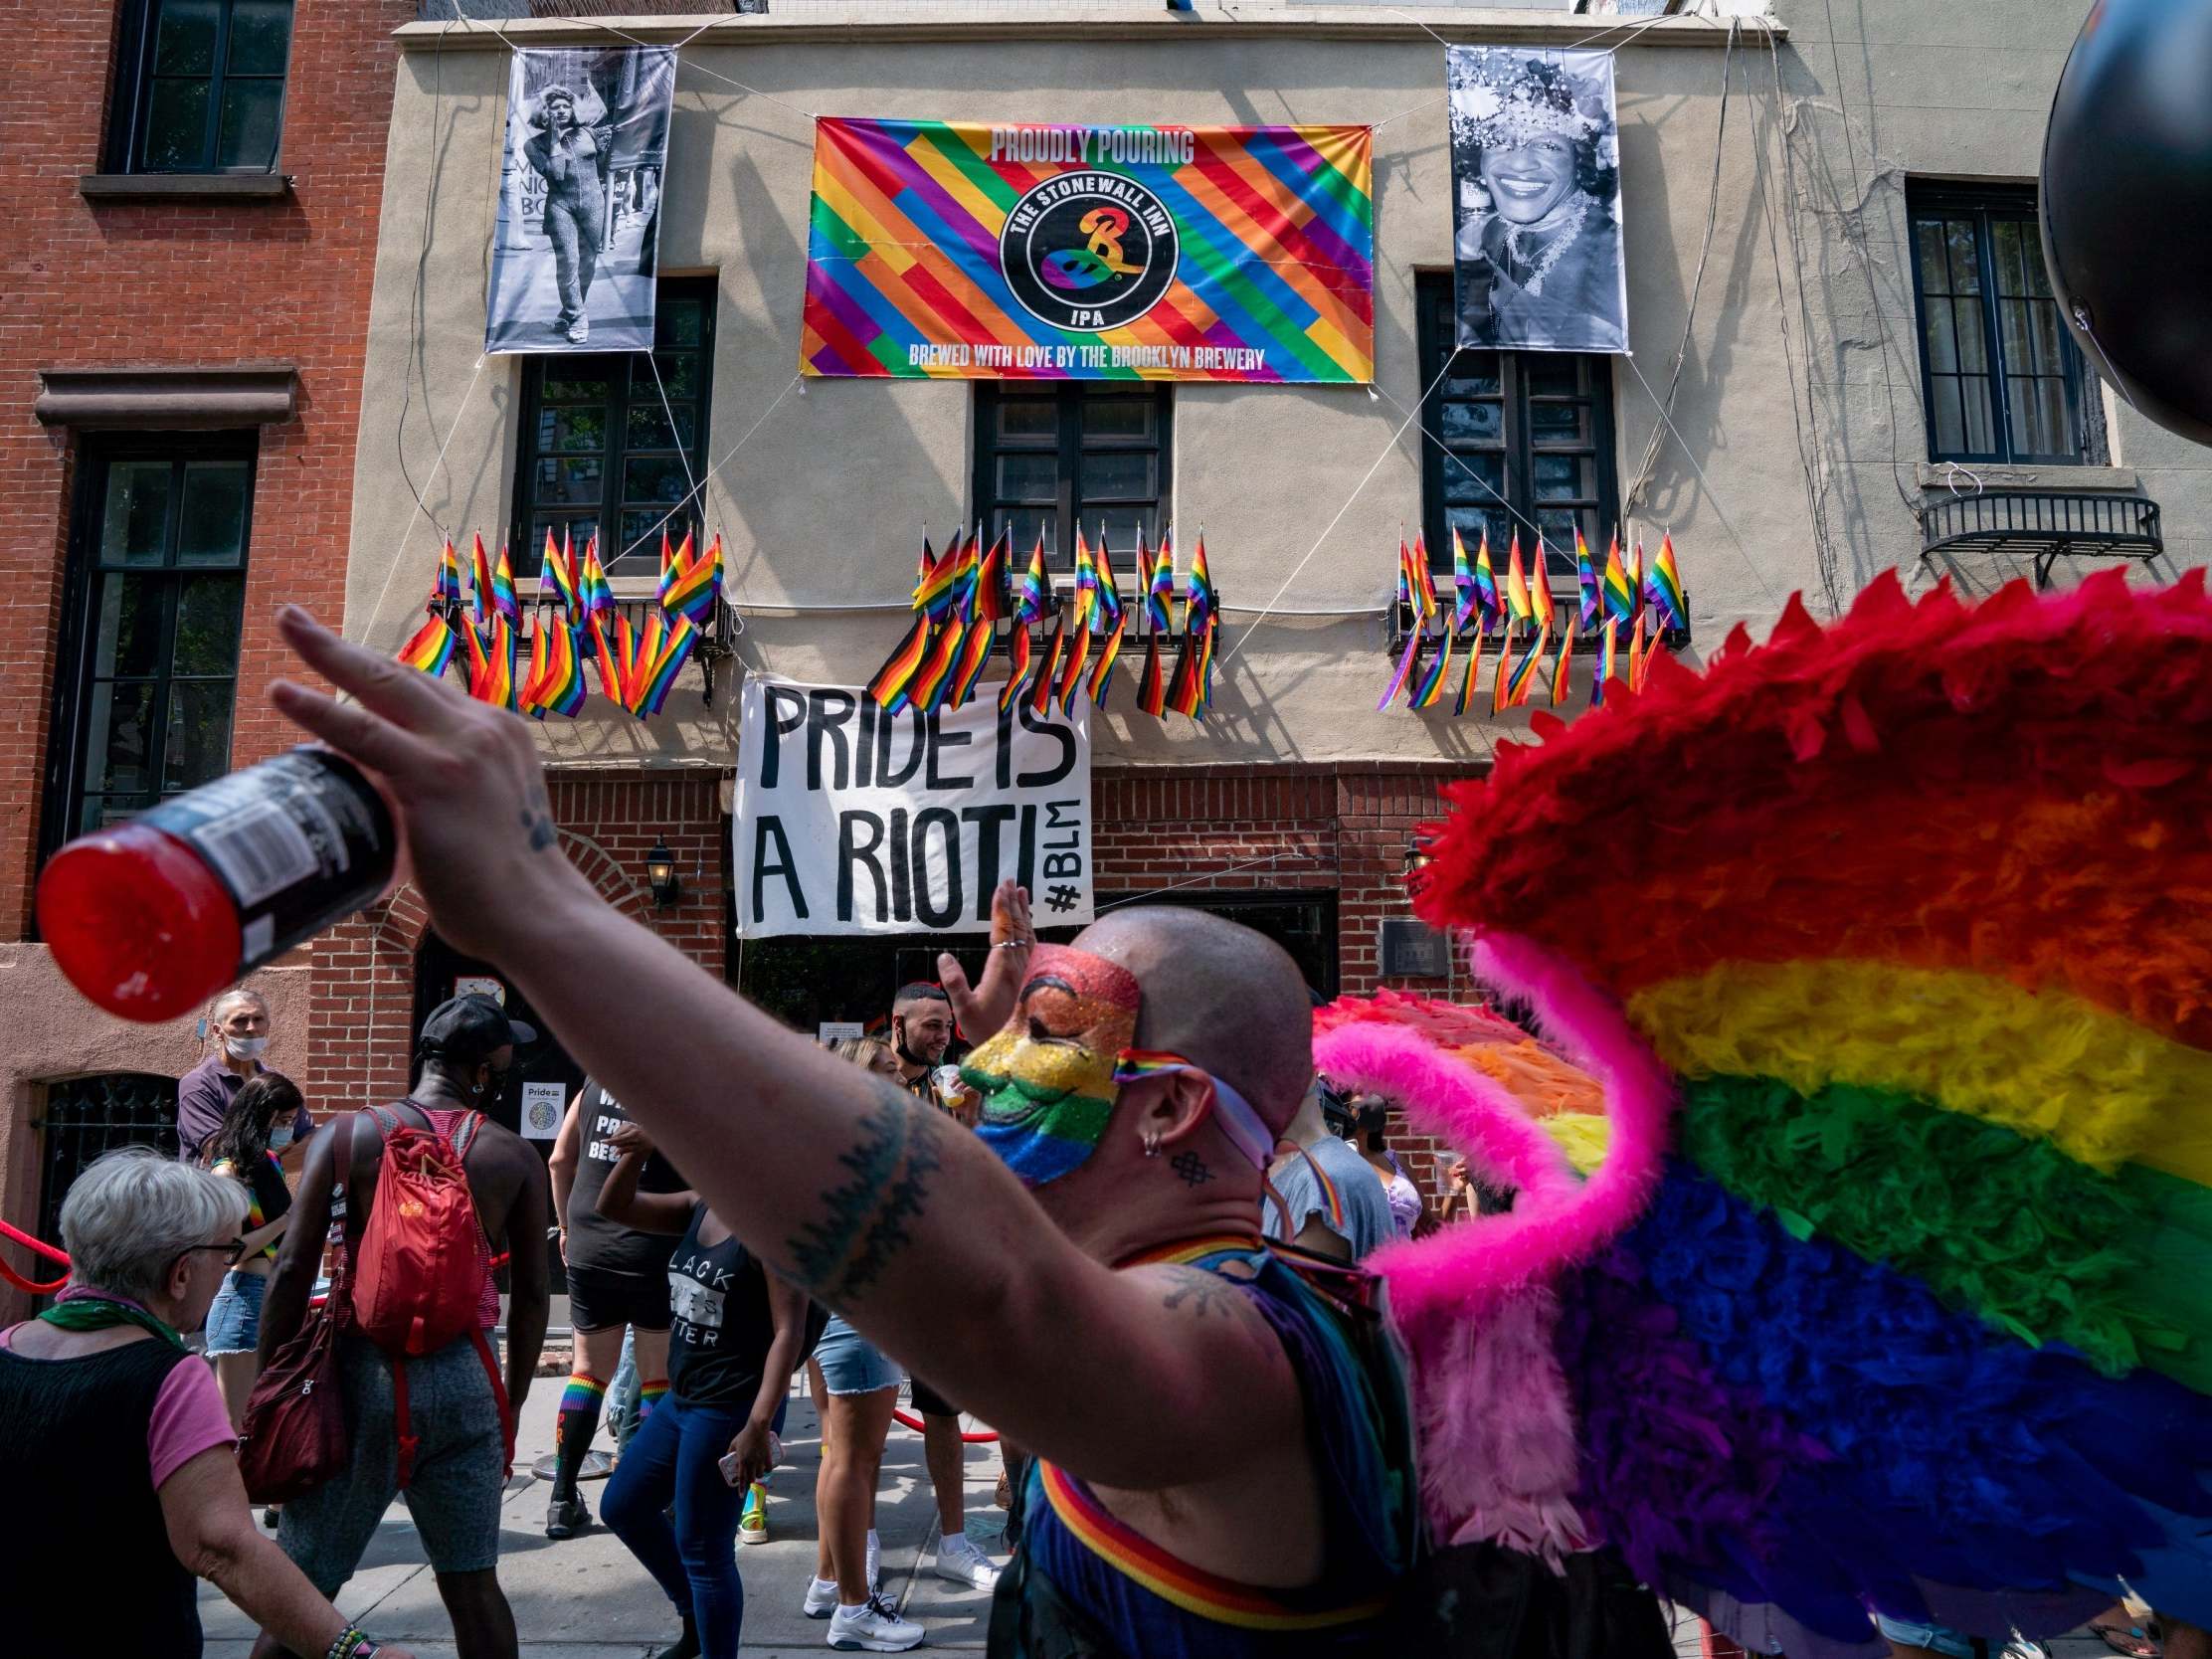 The Stonewall Inn recalls its part in the gay community’s demonstrations this week in 1969